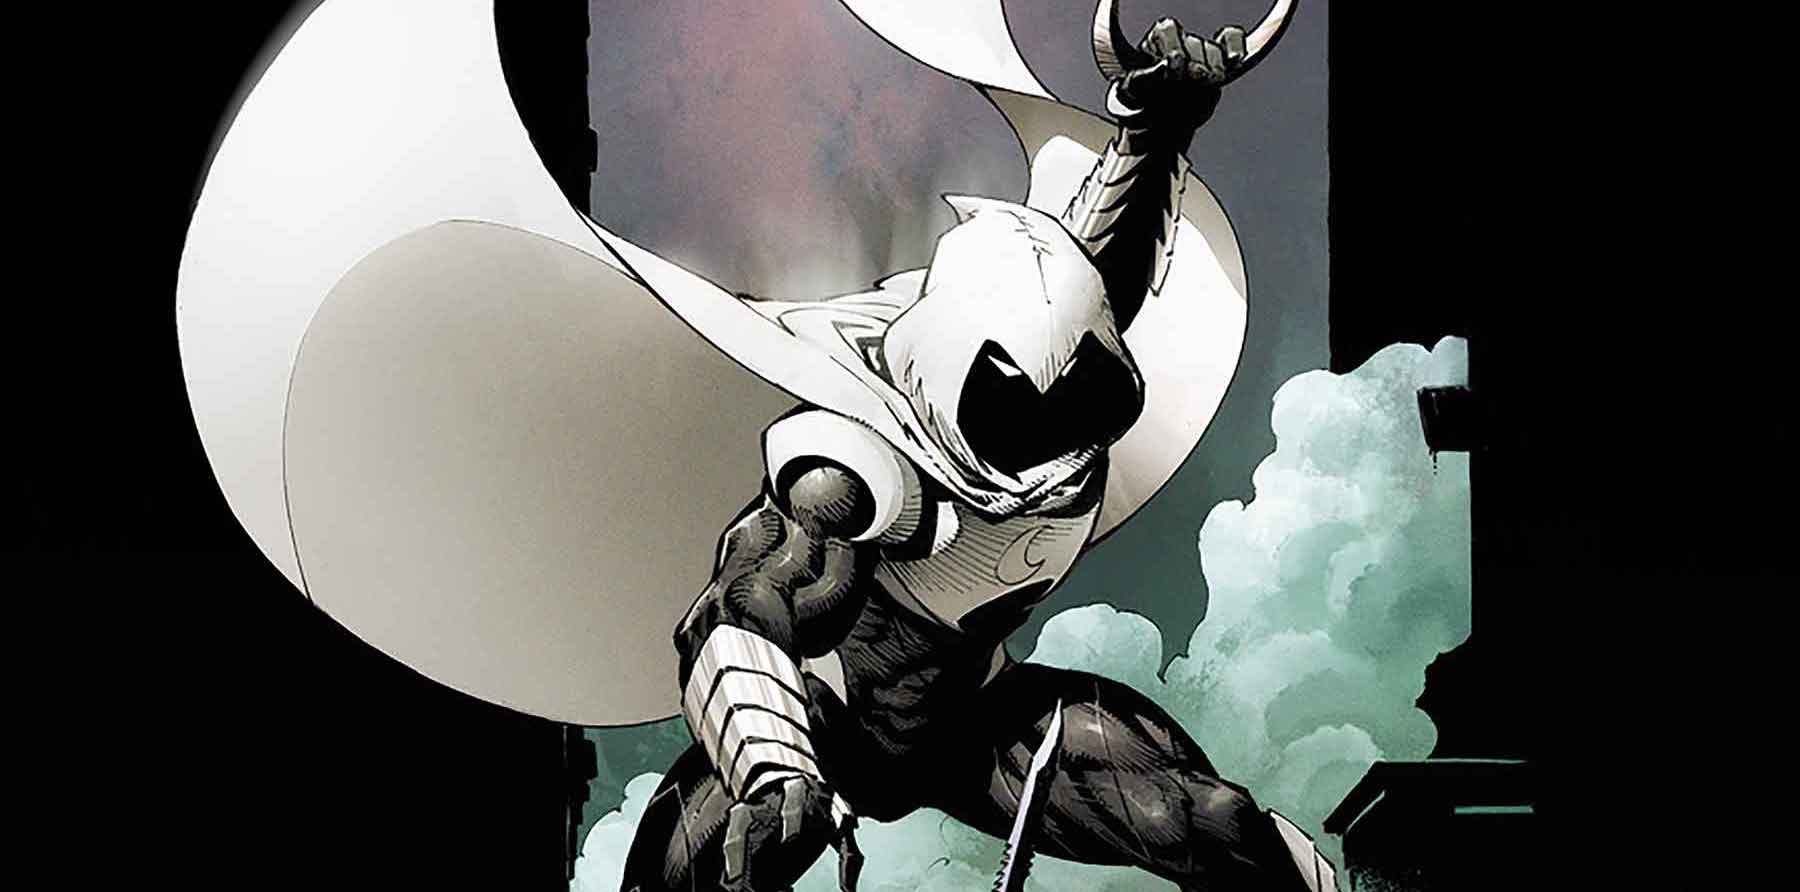 Moon Knight strikes in new Greg Capullo variant covers